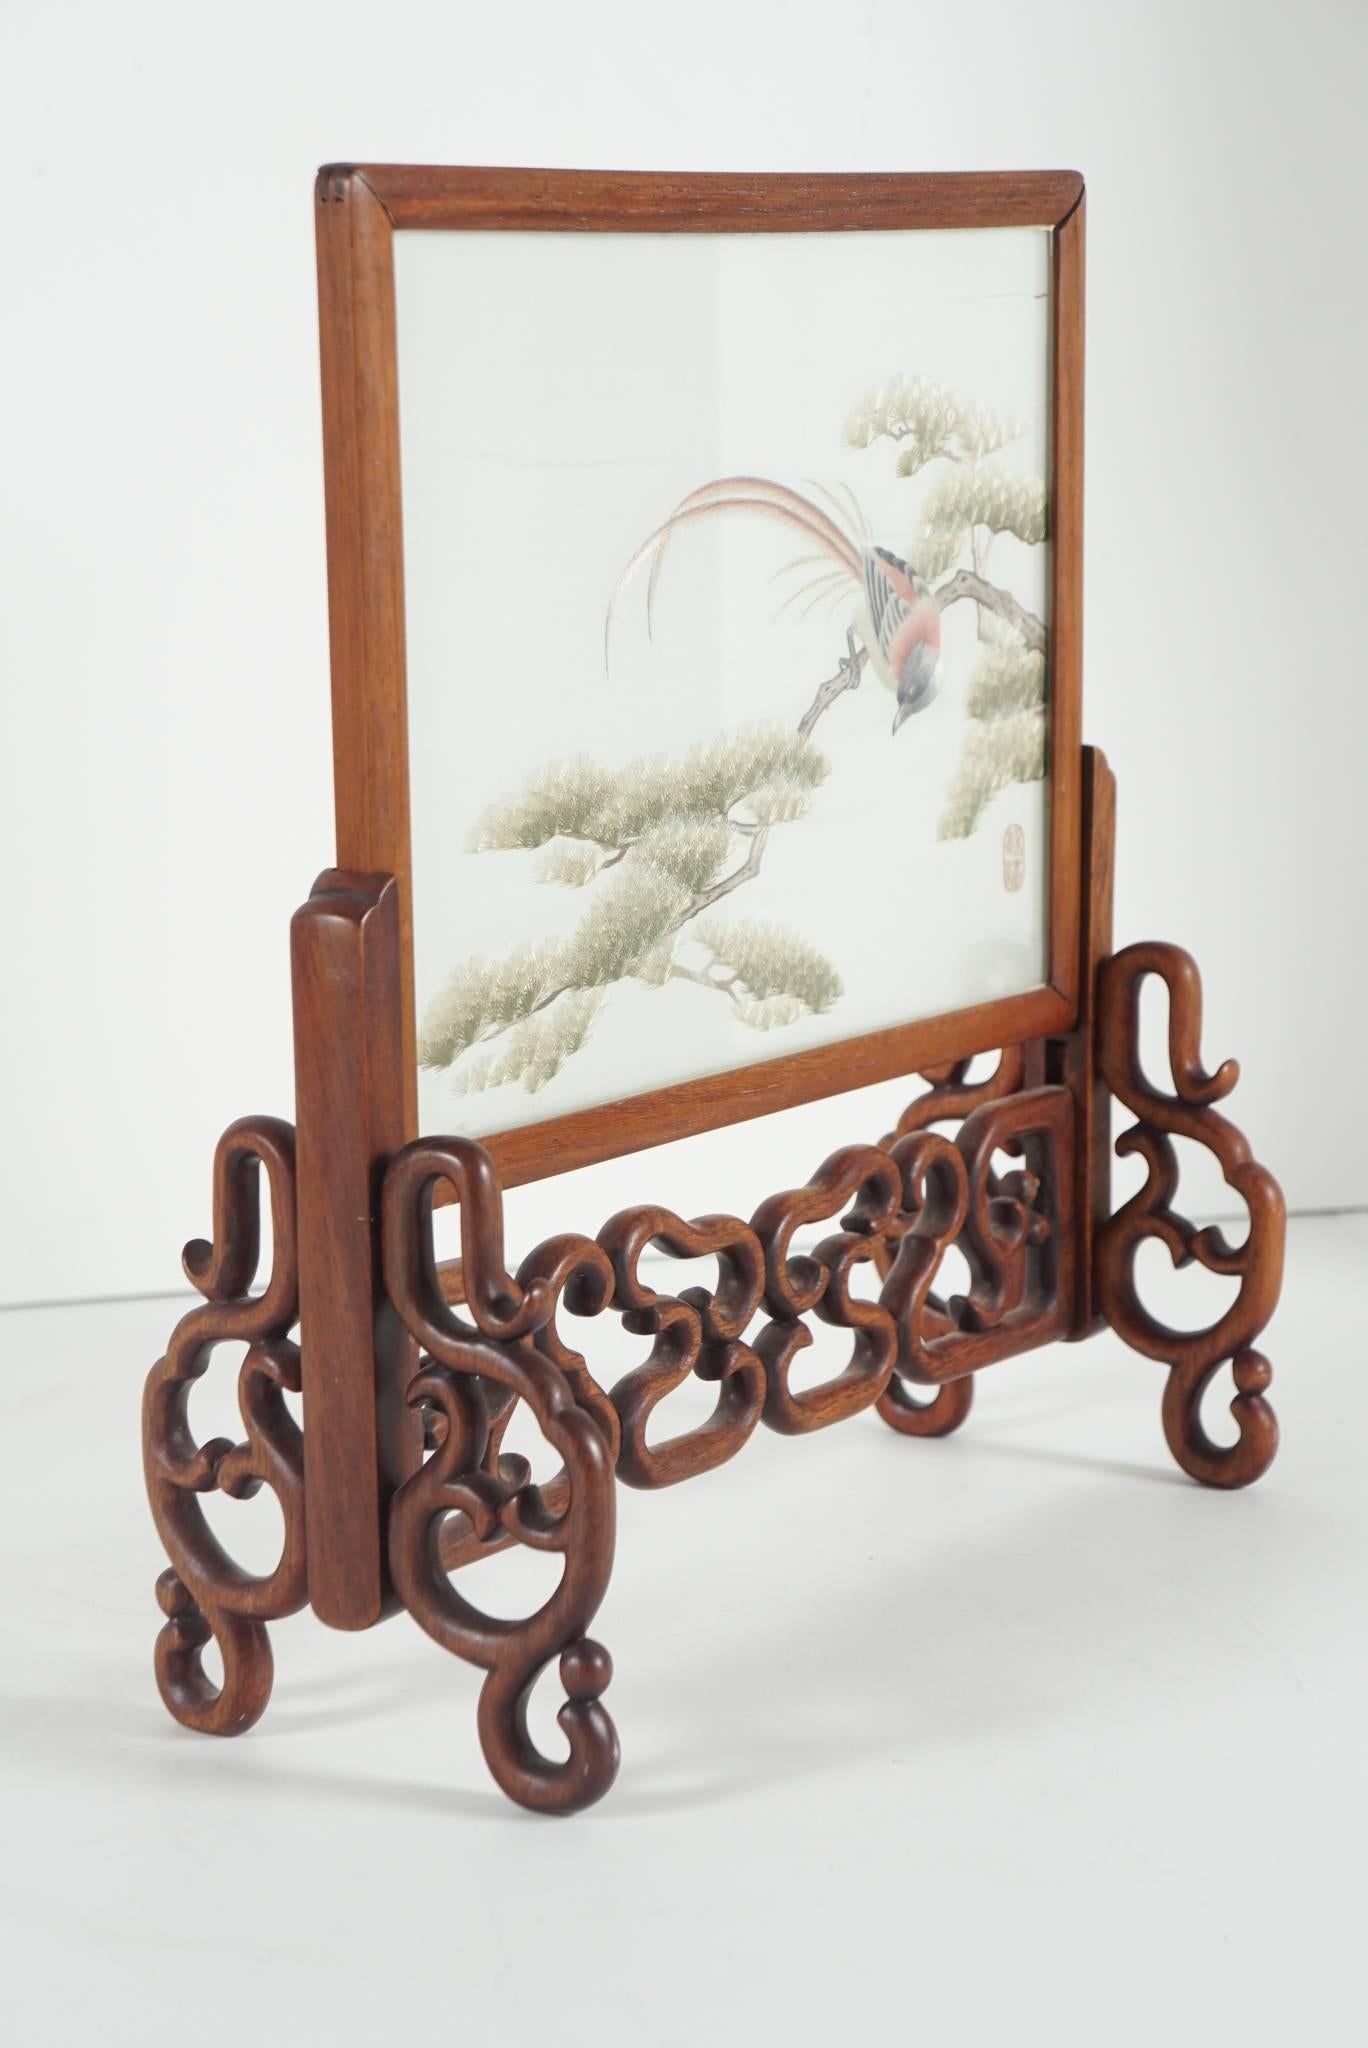 This early 20th century screen is refined and very beautiful. The image of a bird observing life from a tree is worked in thread on silk mesh sandwiched between two sheets of glass. The panel is signed and sits in a nice rosewood stand. The mesh has